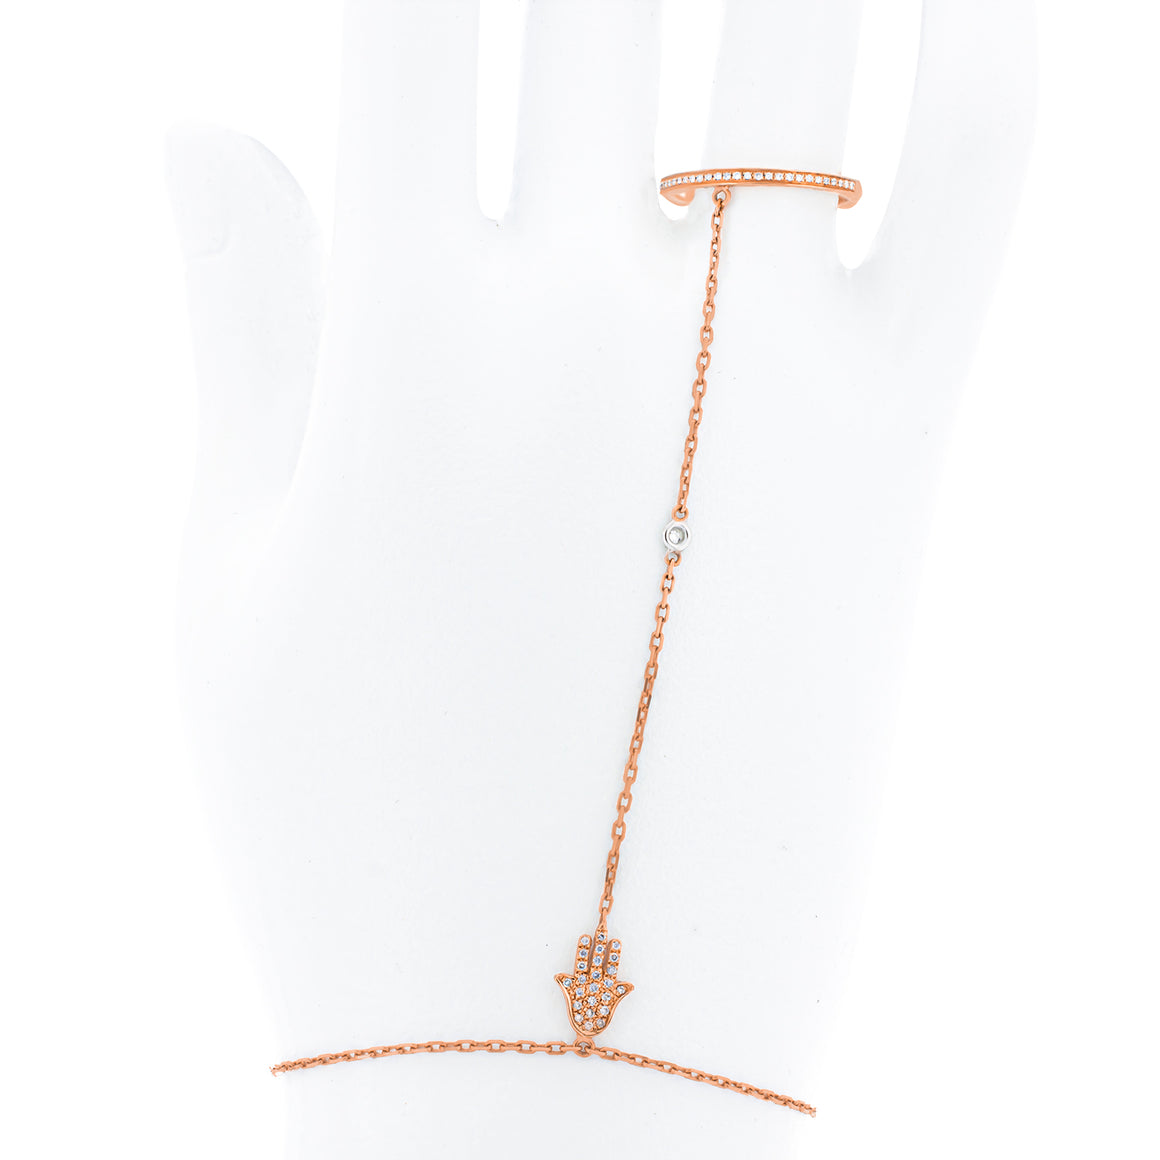 Diamond Ring attached to bracelet | 57 round diamonds in 18K Rose gold very delicate and jewelry | Hamsa slave bracelet - hand chain